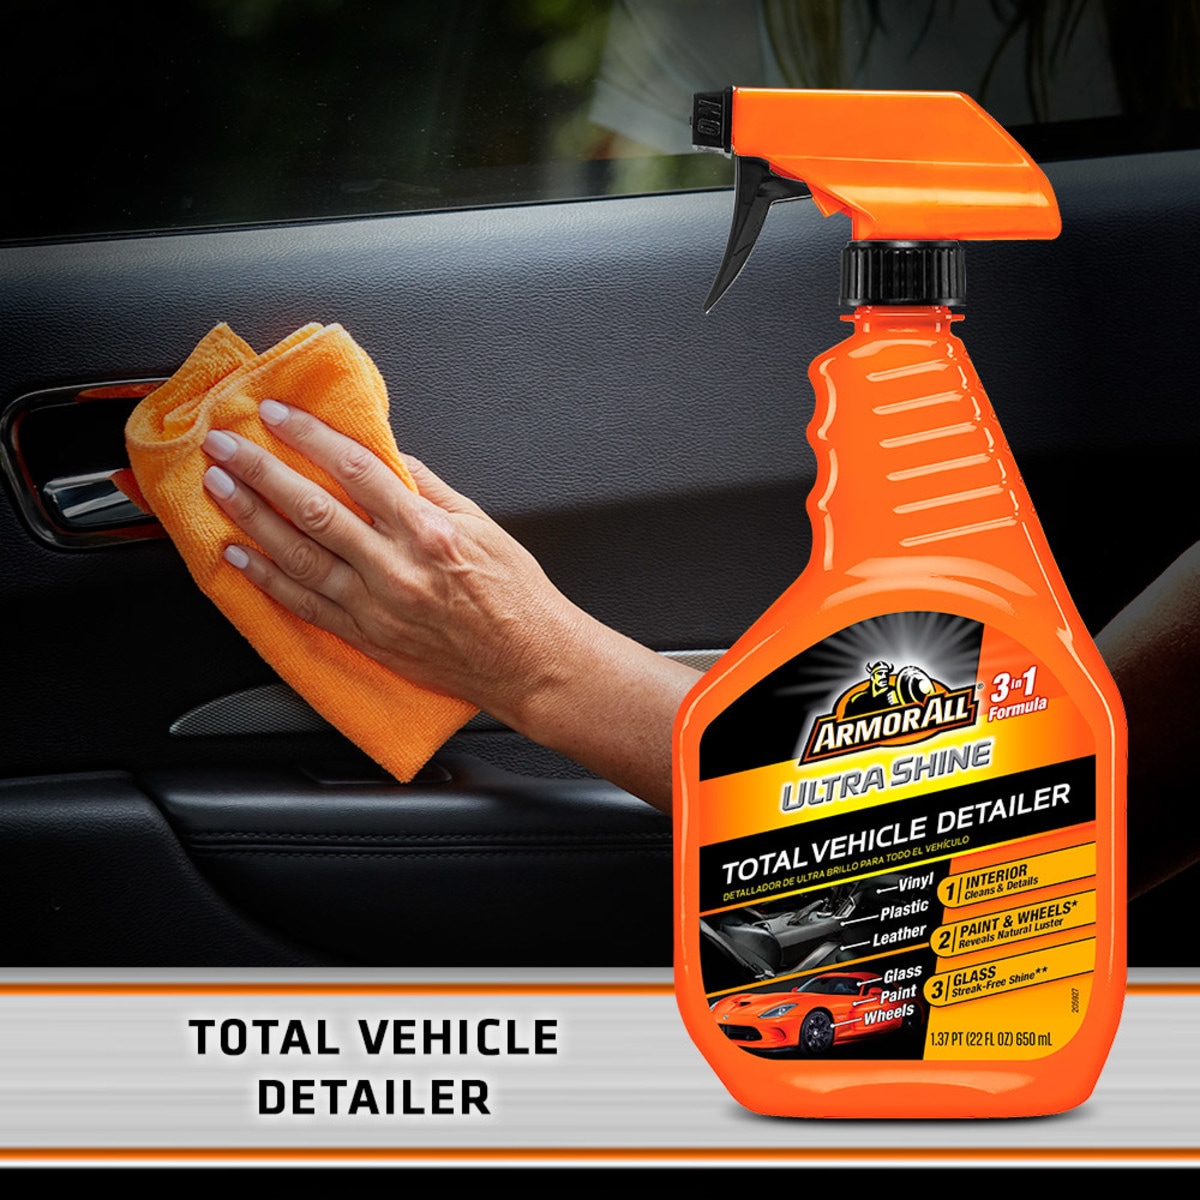 Armor All Leather Care 16 oz, Car Leather Cleaner and Conditioner